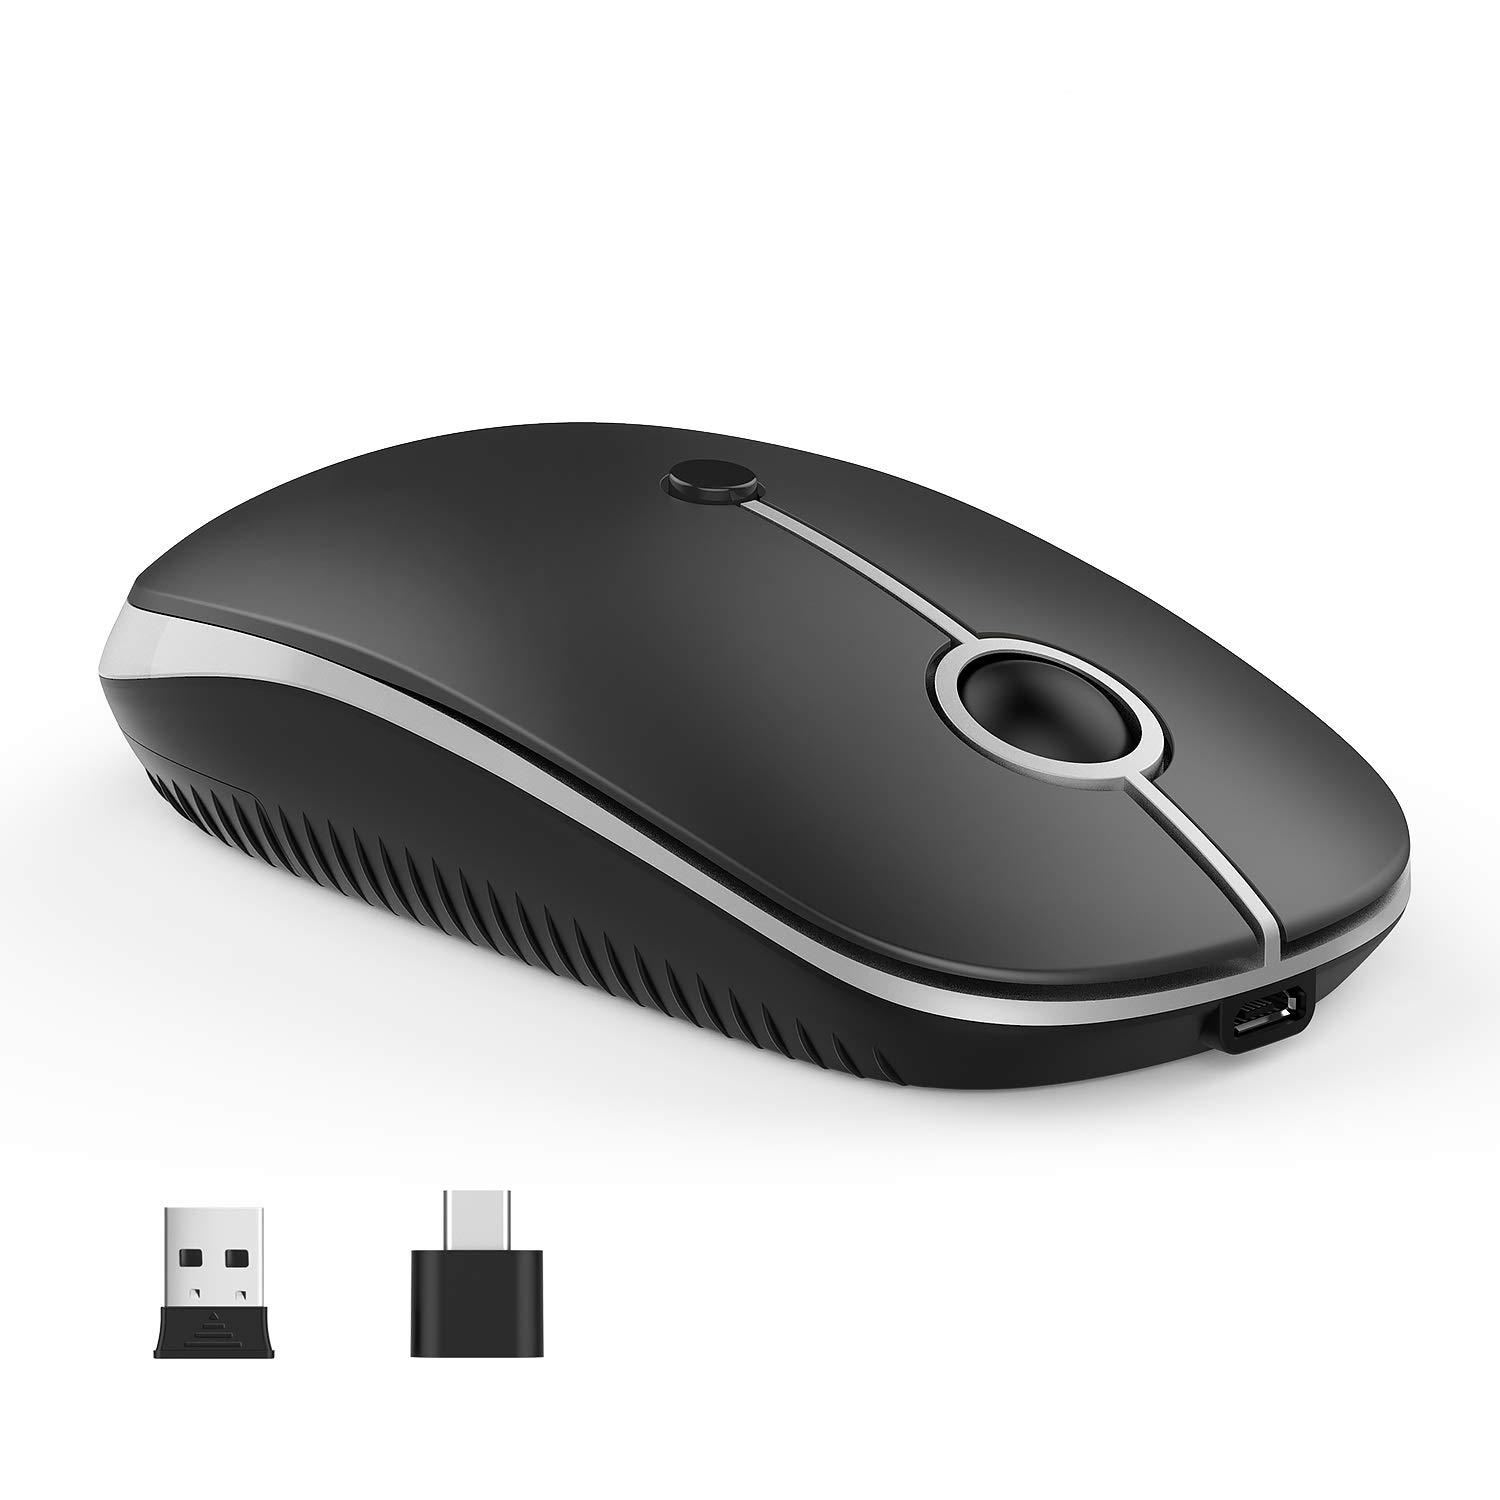 Type C Wireless Mouse，Vssoplor USB C MacBook Wireless Mouse Dual Mode 2.4G Cordless Mice with Nano USB and Type C Receiver Compatible with PC, Laptop, MacBook and All Type C Devices-Black and Silver